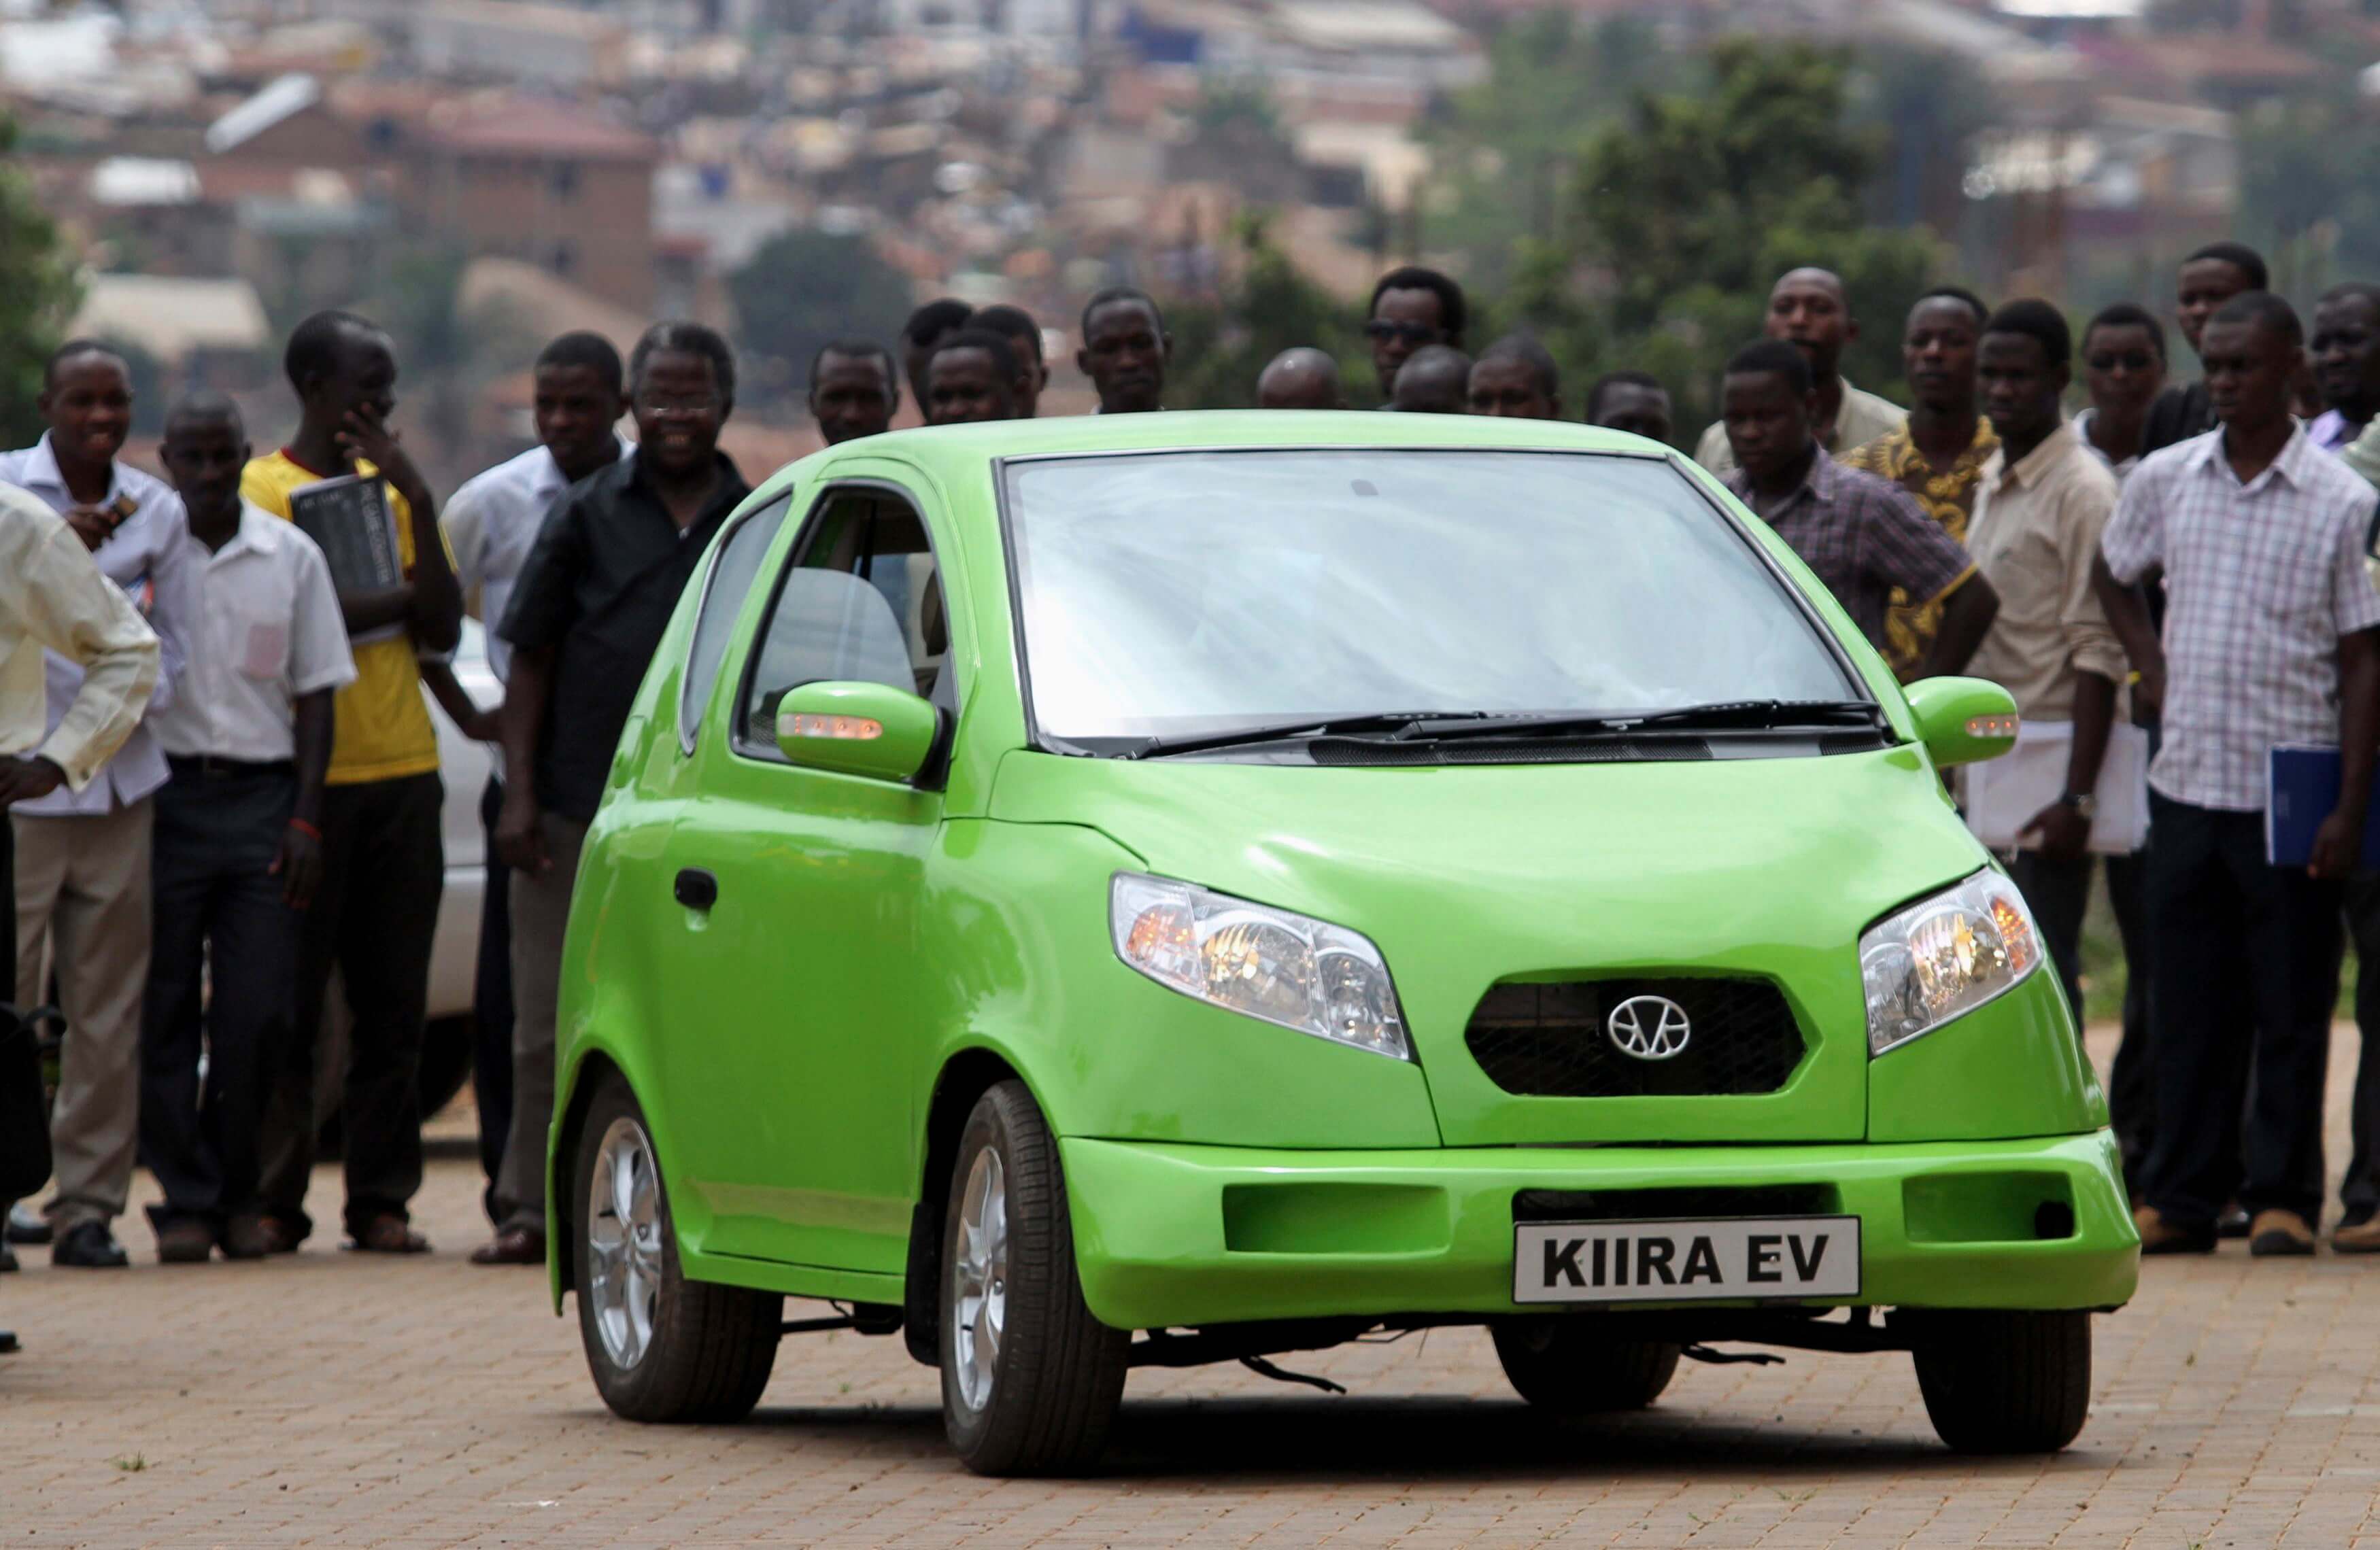 Kiira EV car False Things You Have Heard and Believed About Africa